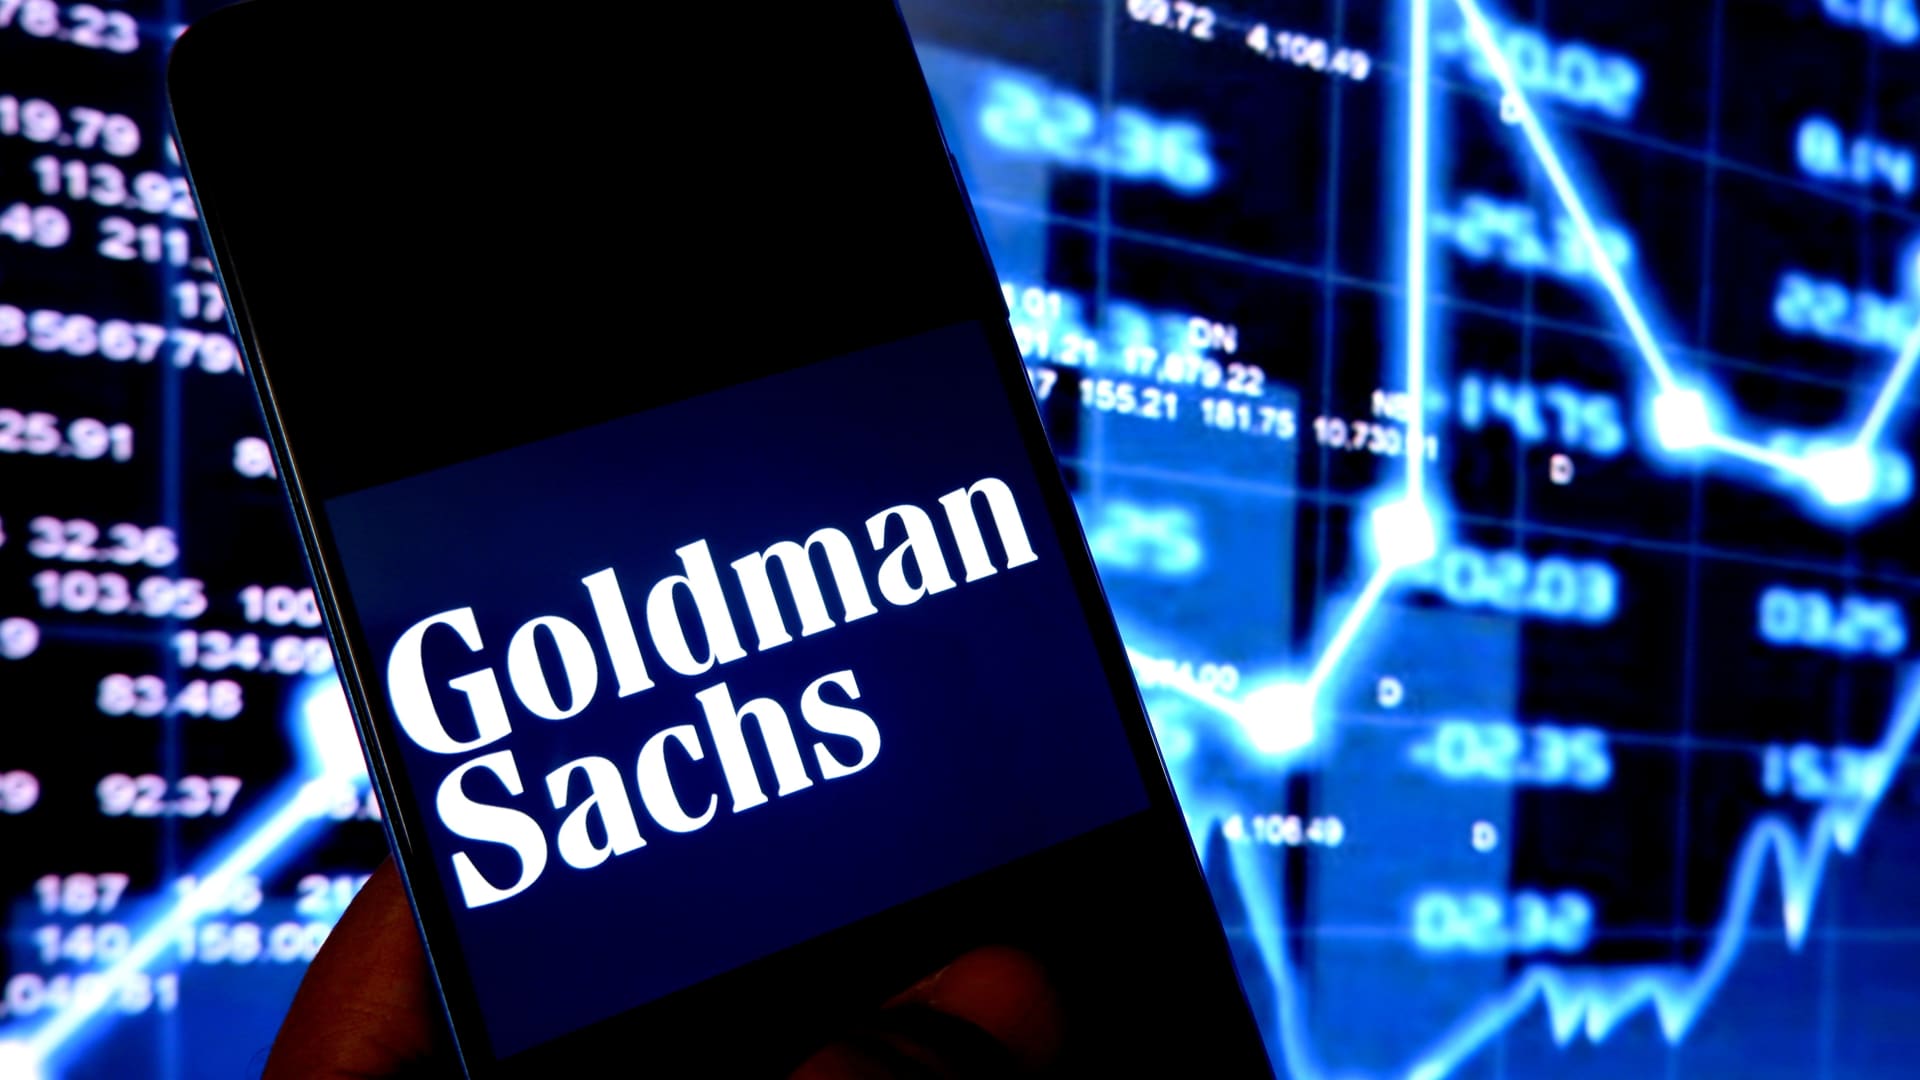 A Goldman Sachs logo is displayed on an android smartphone.